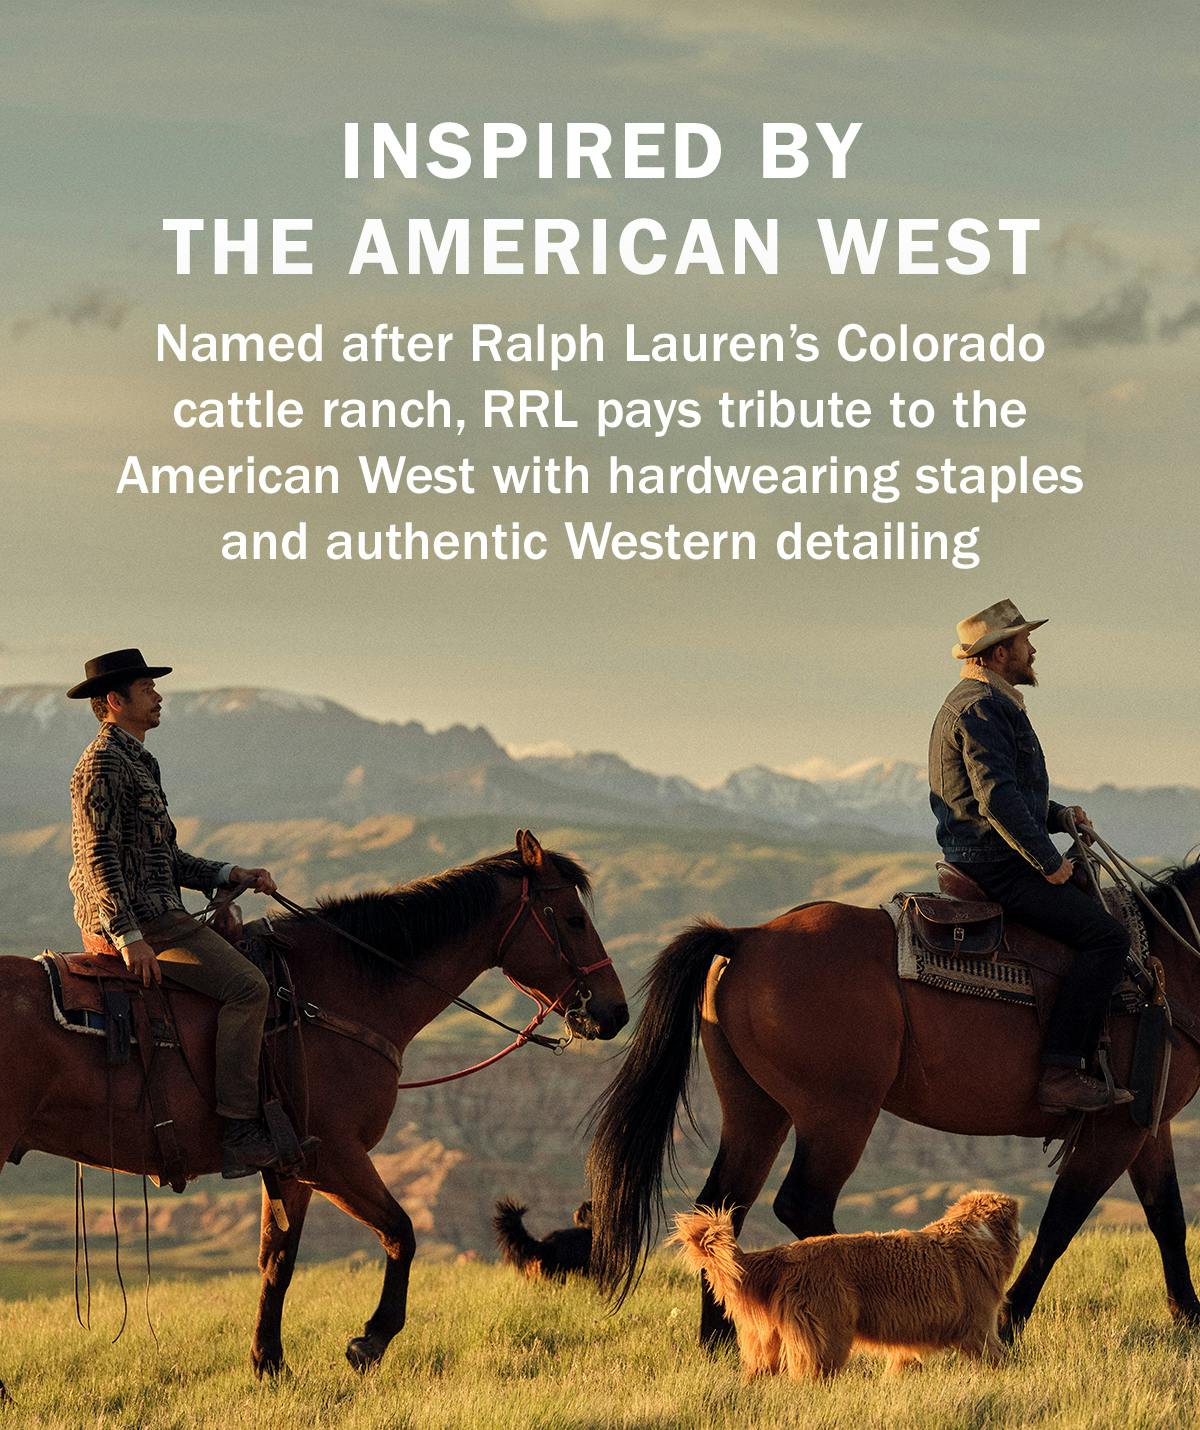 INSPIRED BY THE AMERICAN WEST